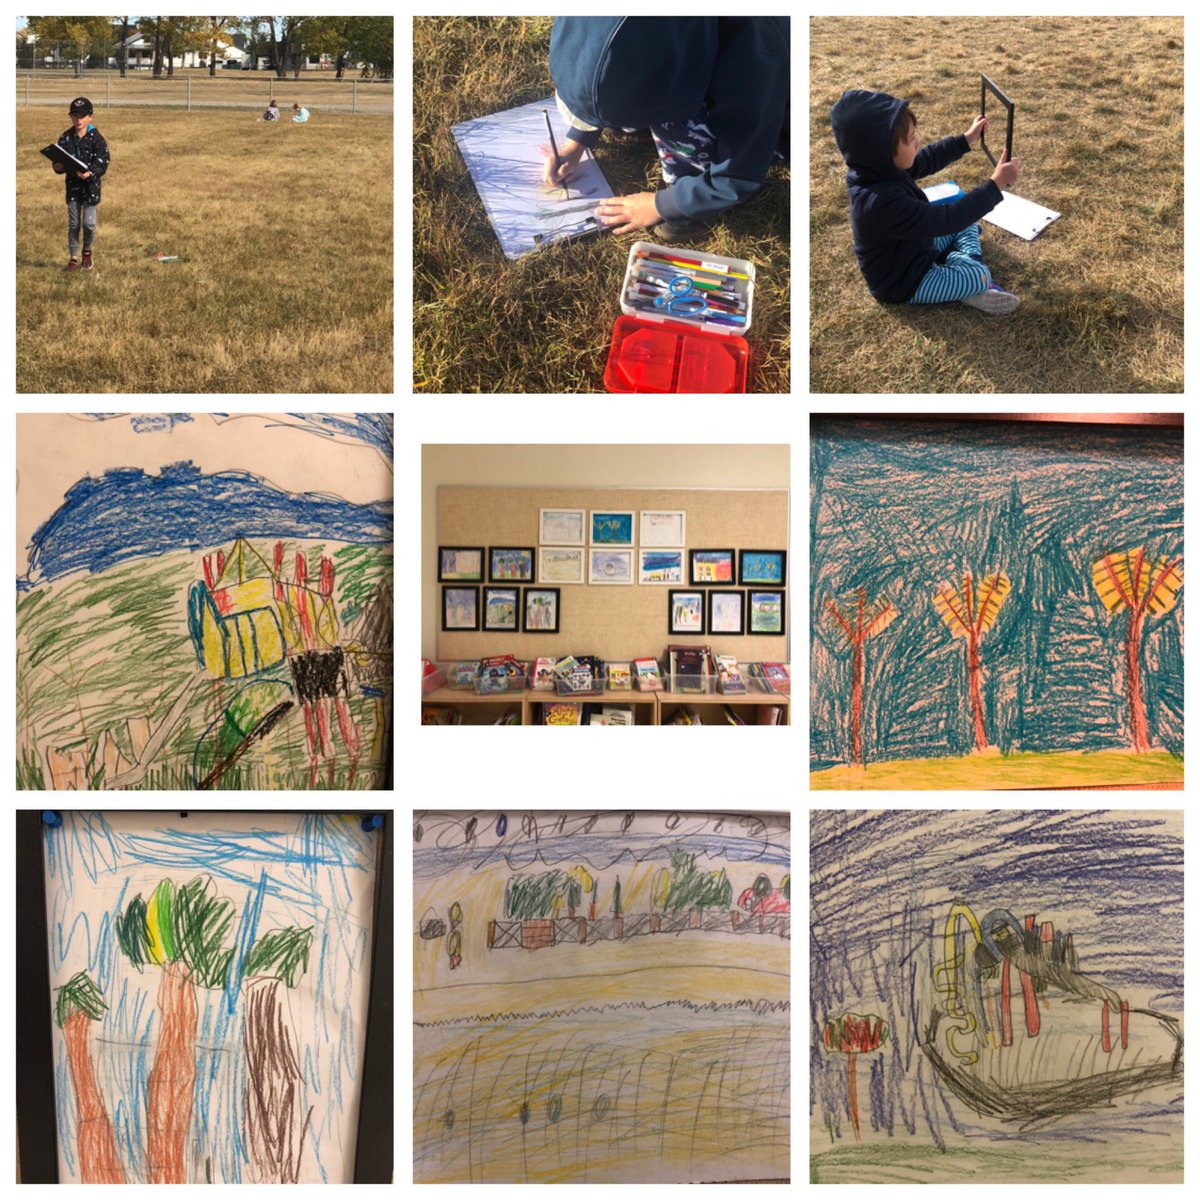 We used picture frames to help us capture “the whole picture” as artists. Check out the beginning of our gallery! #art #learningoutside #sts #rvsed